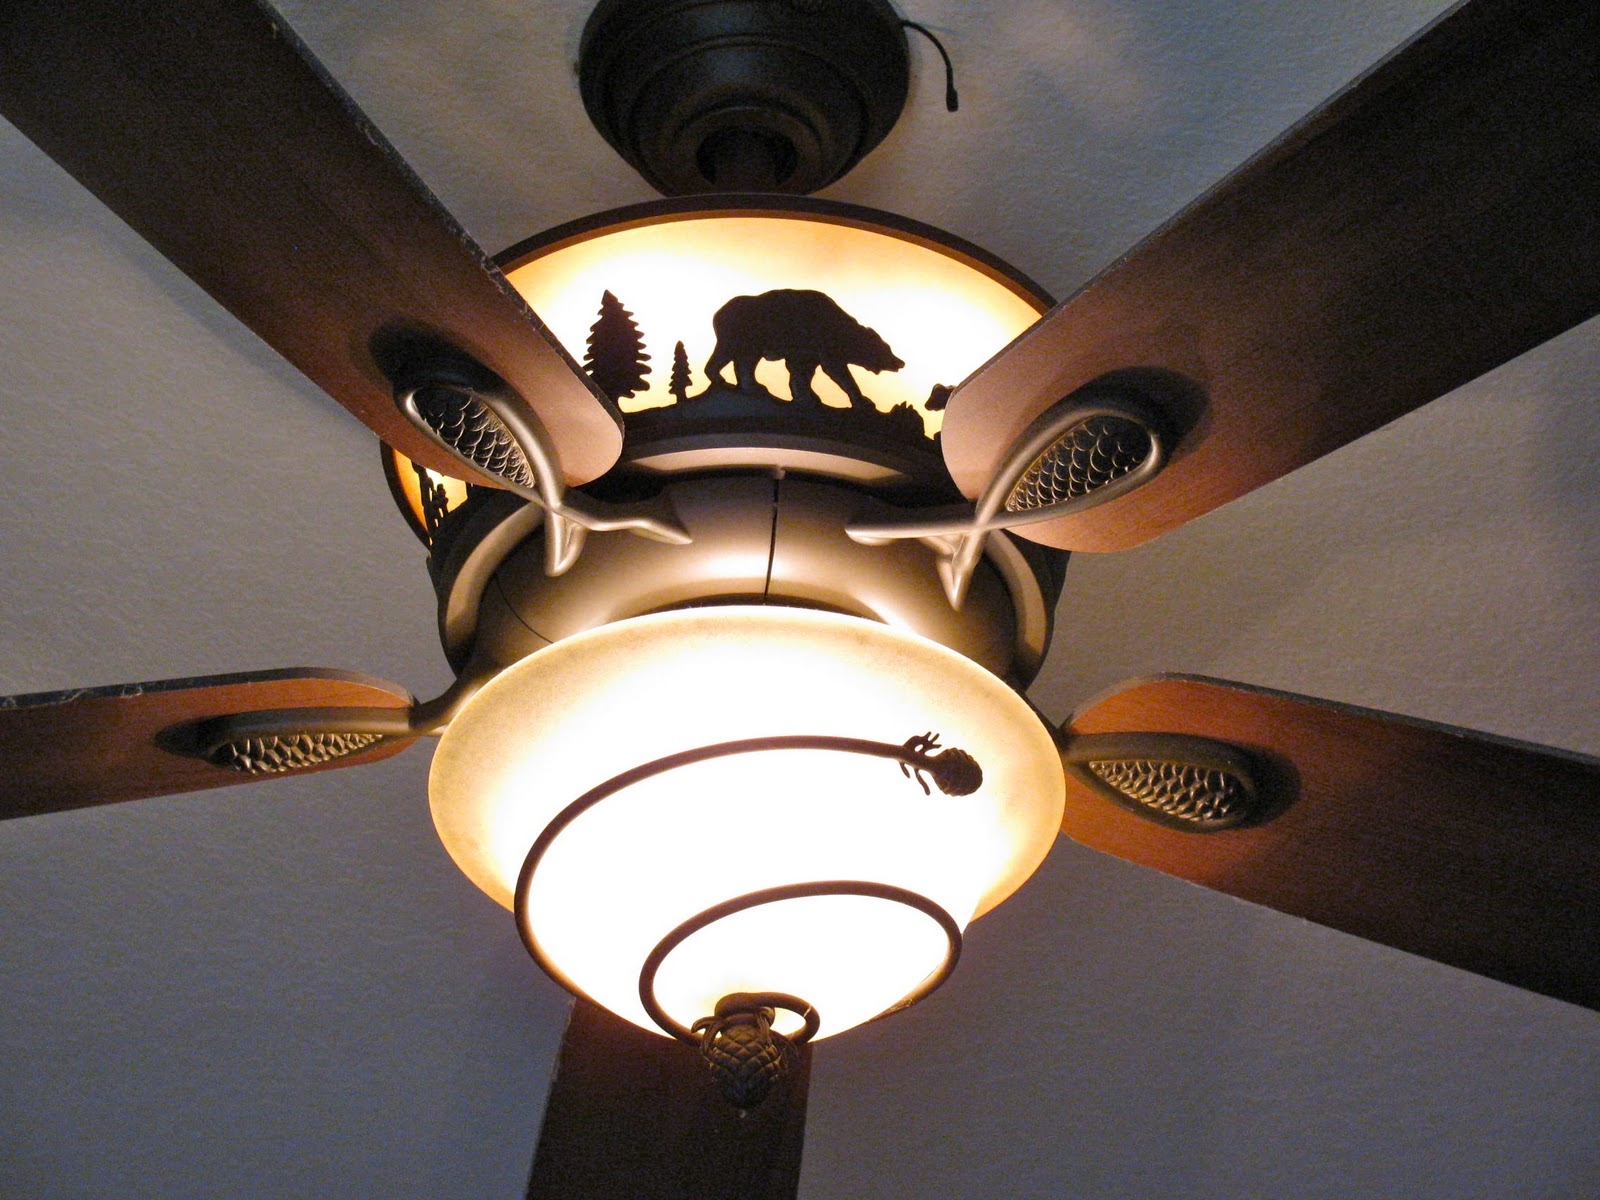 Permalink to Rustic Flush Mount Ceiling Fans With Lights